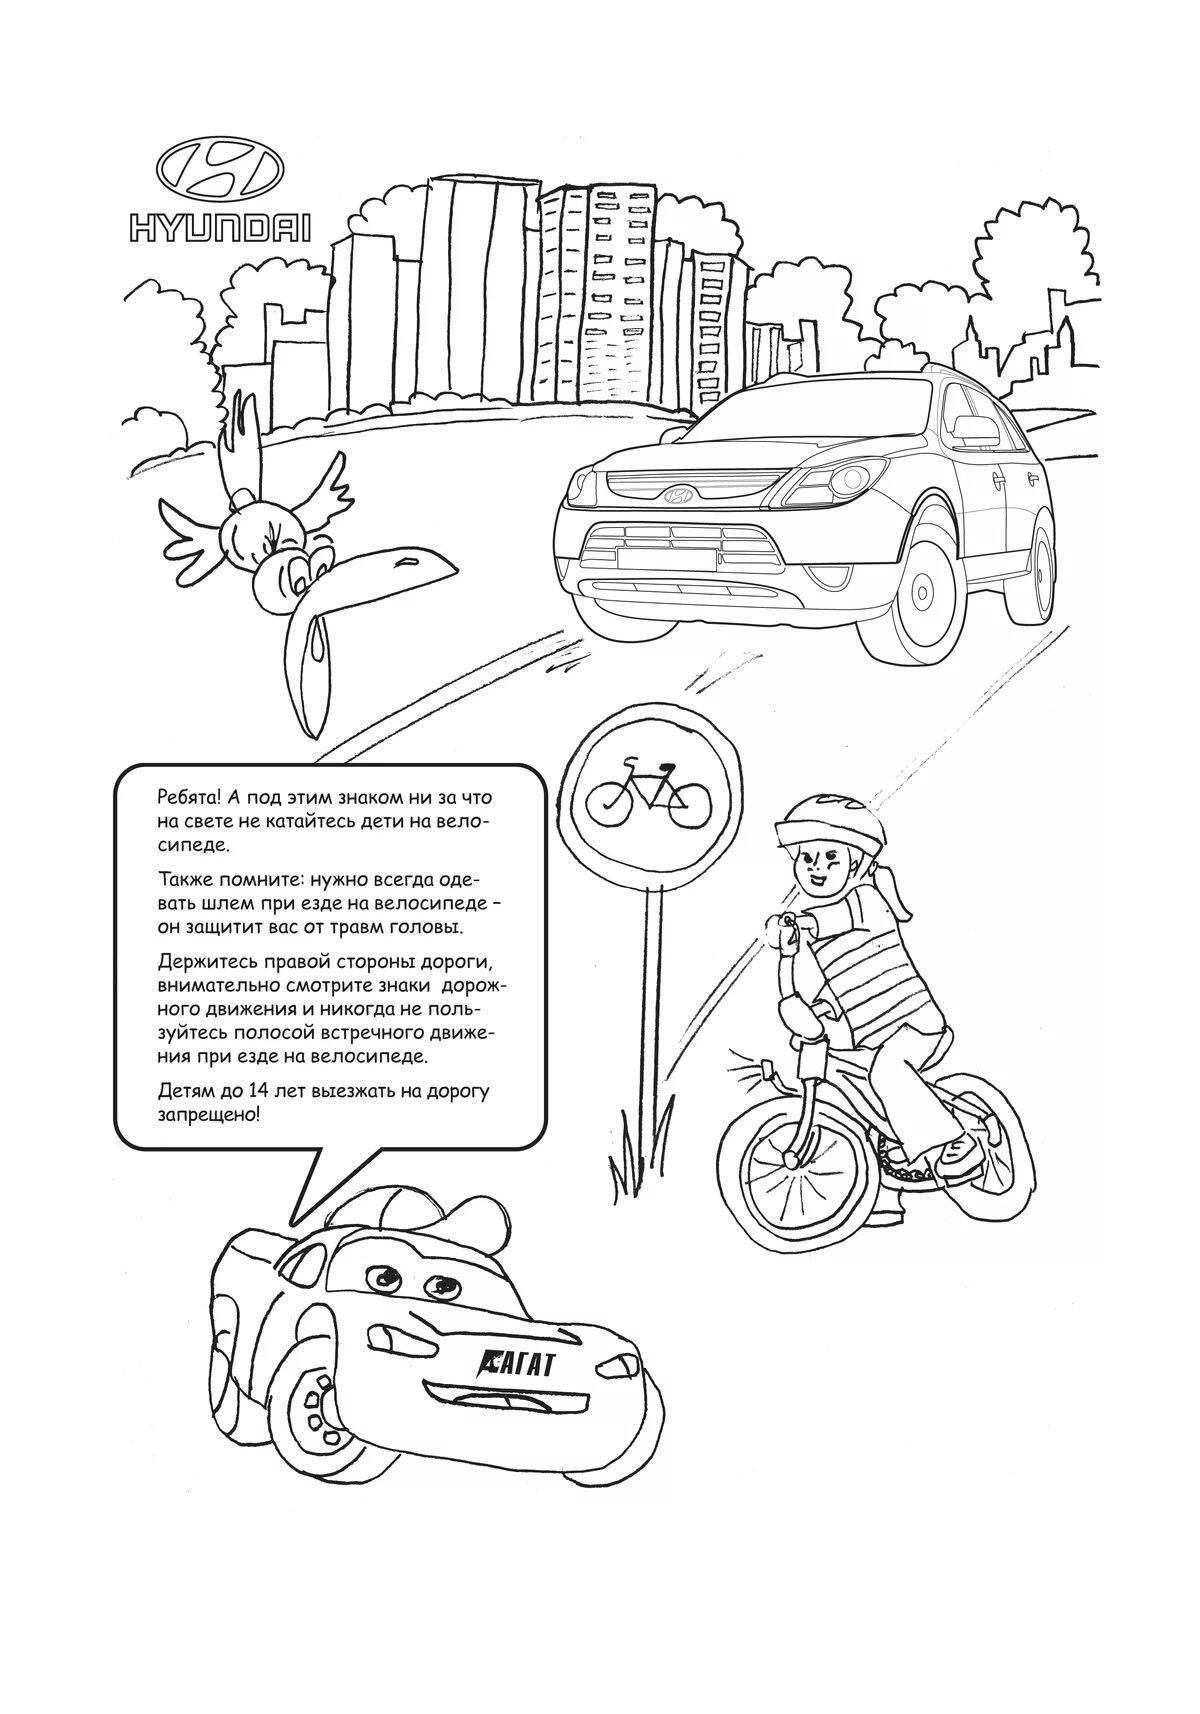 Bright rules of the road coloring book for children 6-7 years old